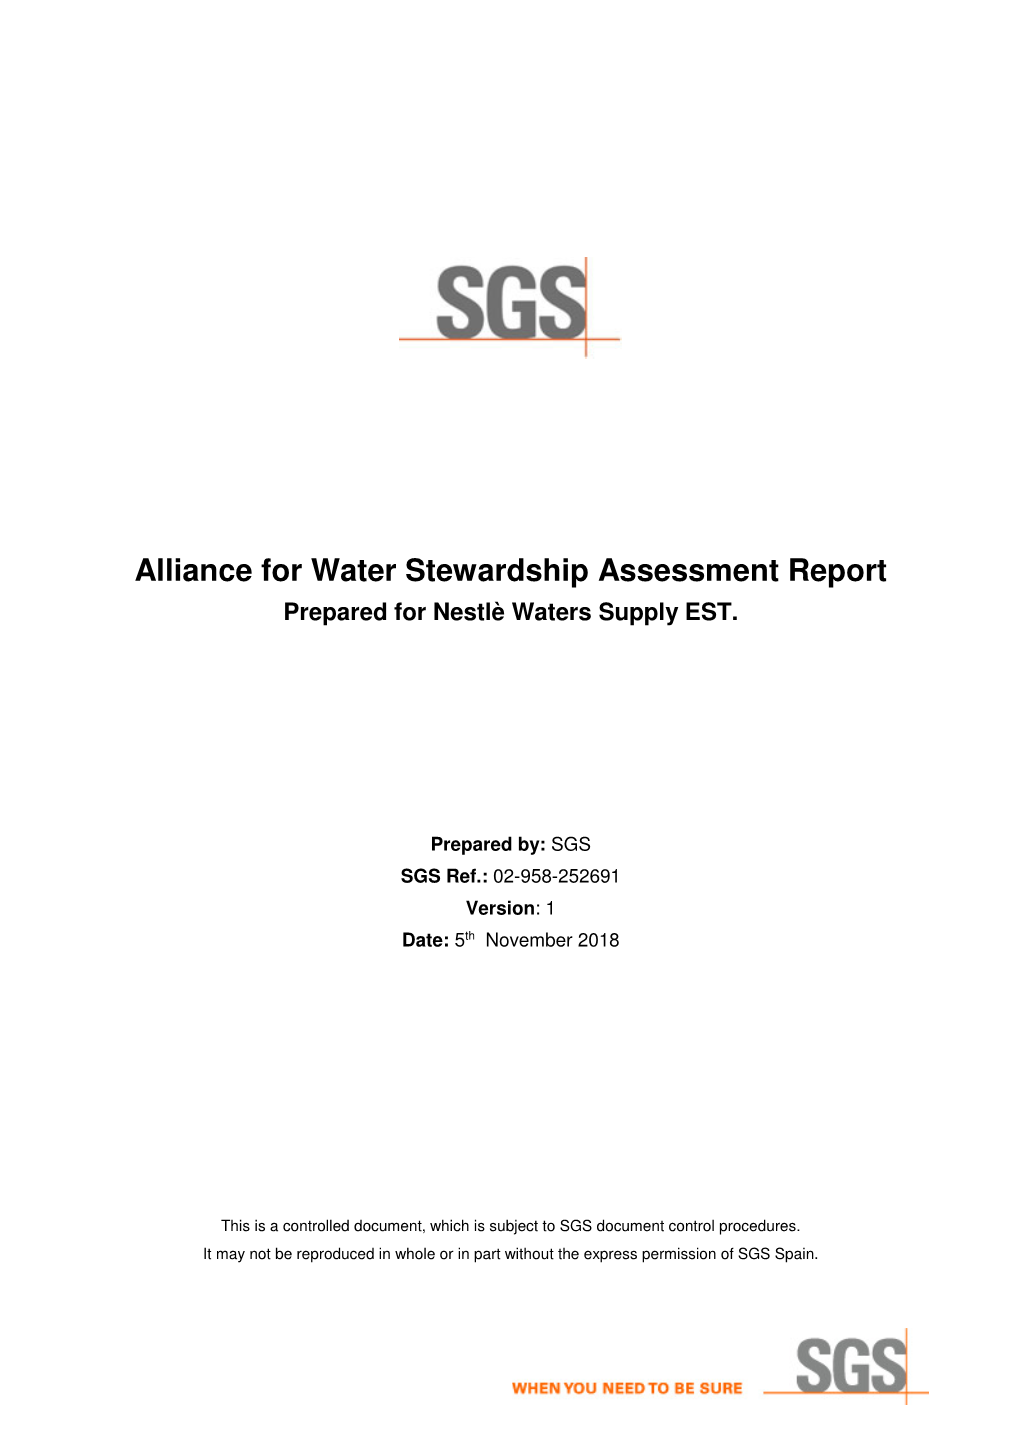 Alliance for Water Stewardship Assessment Report Prepared for Nestlè Waters Supply EST